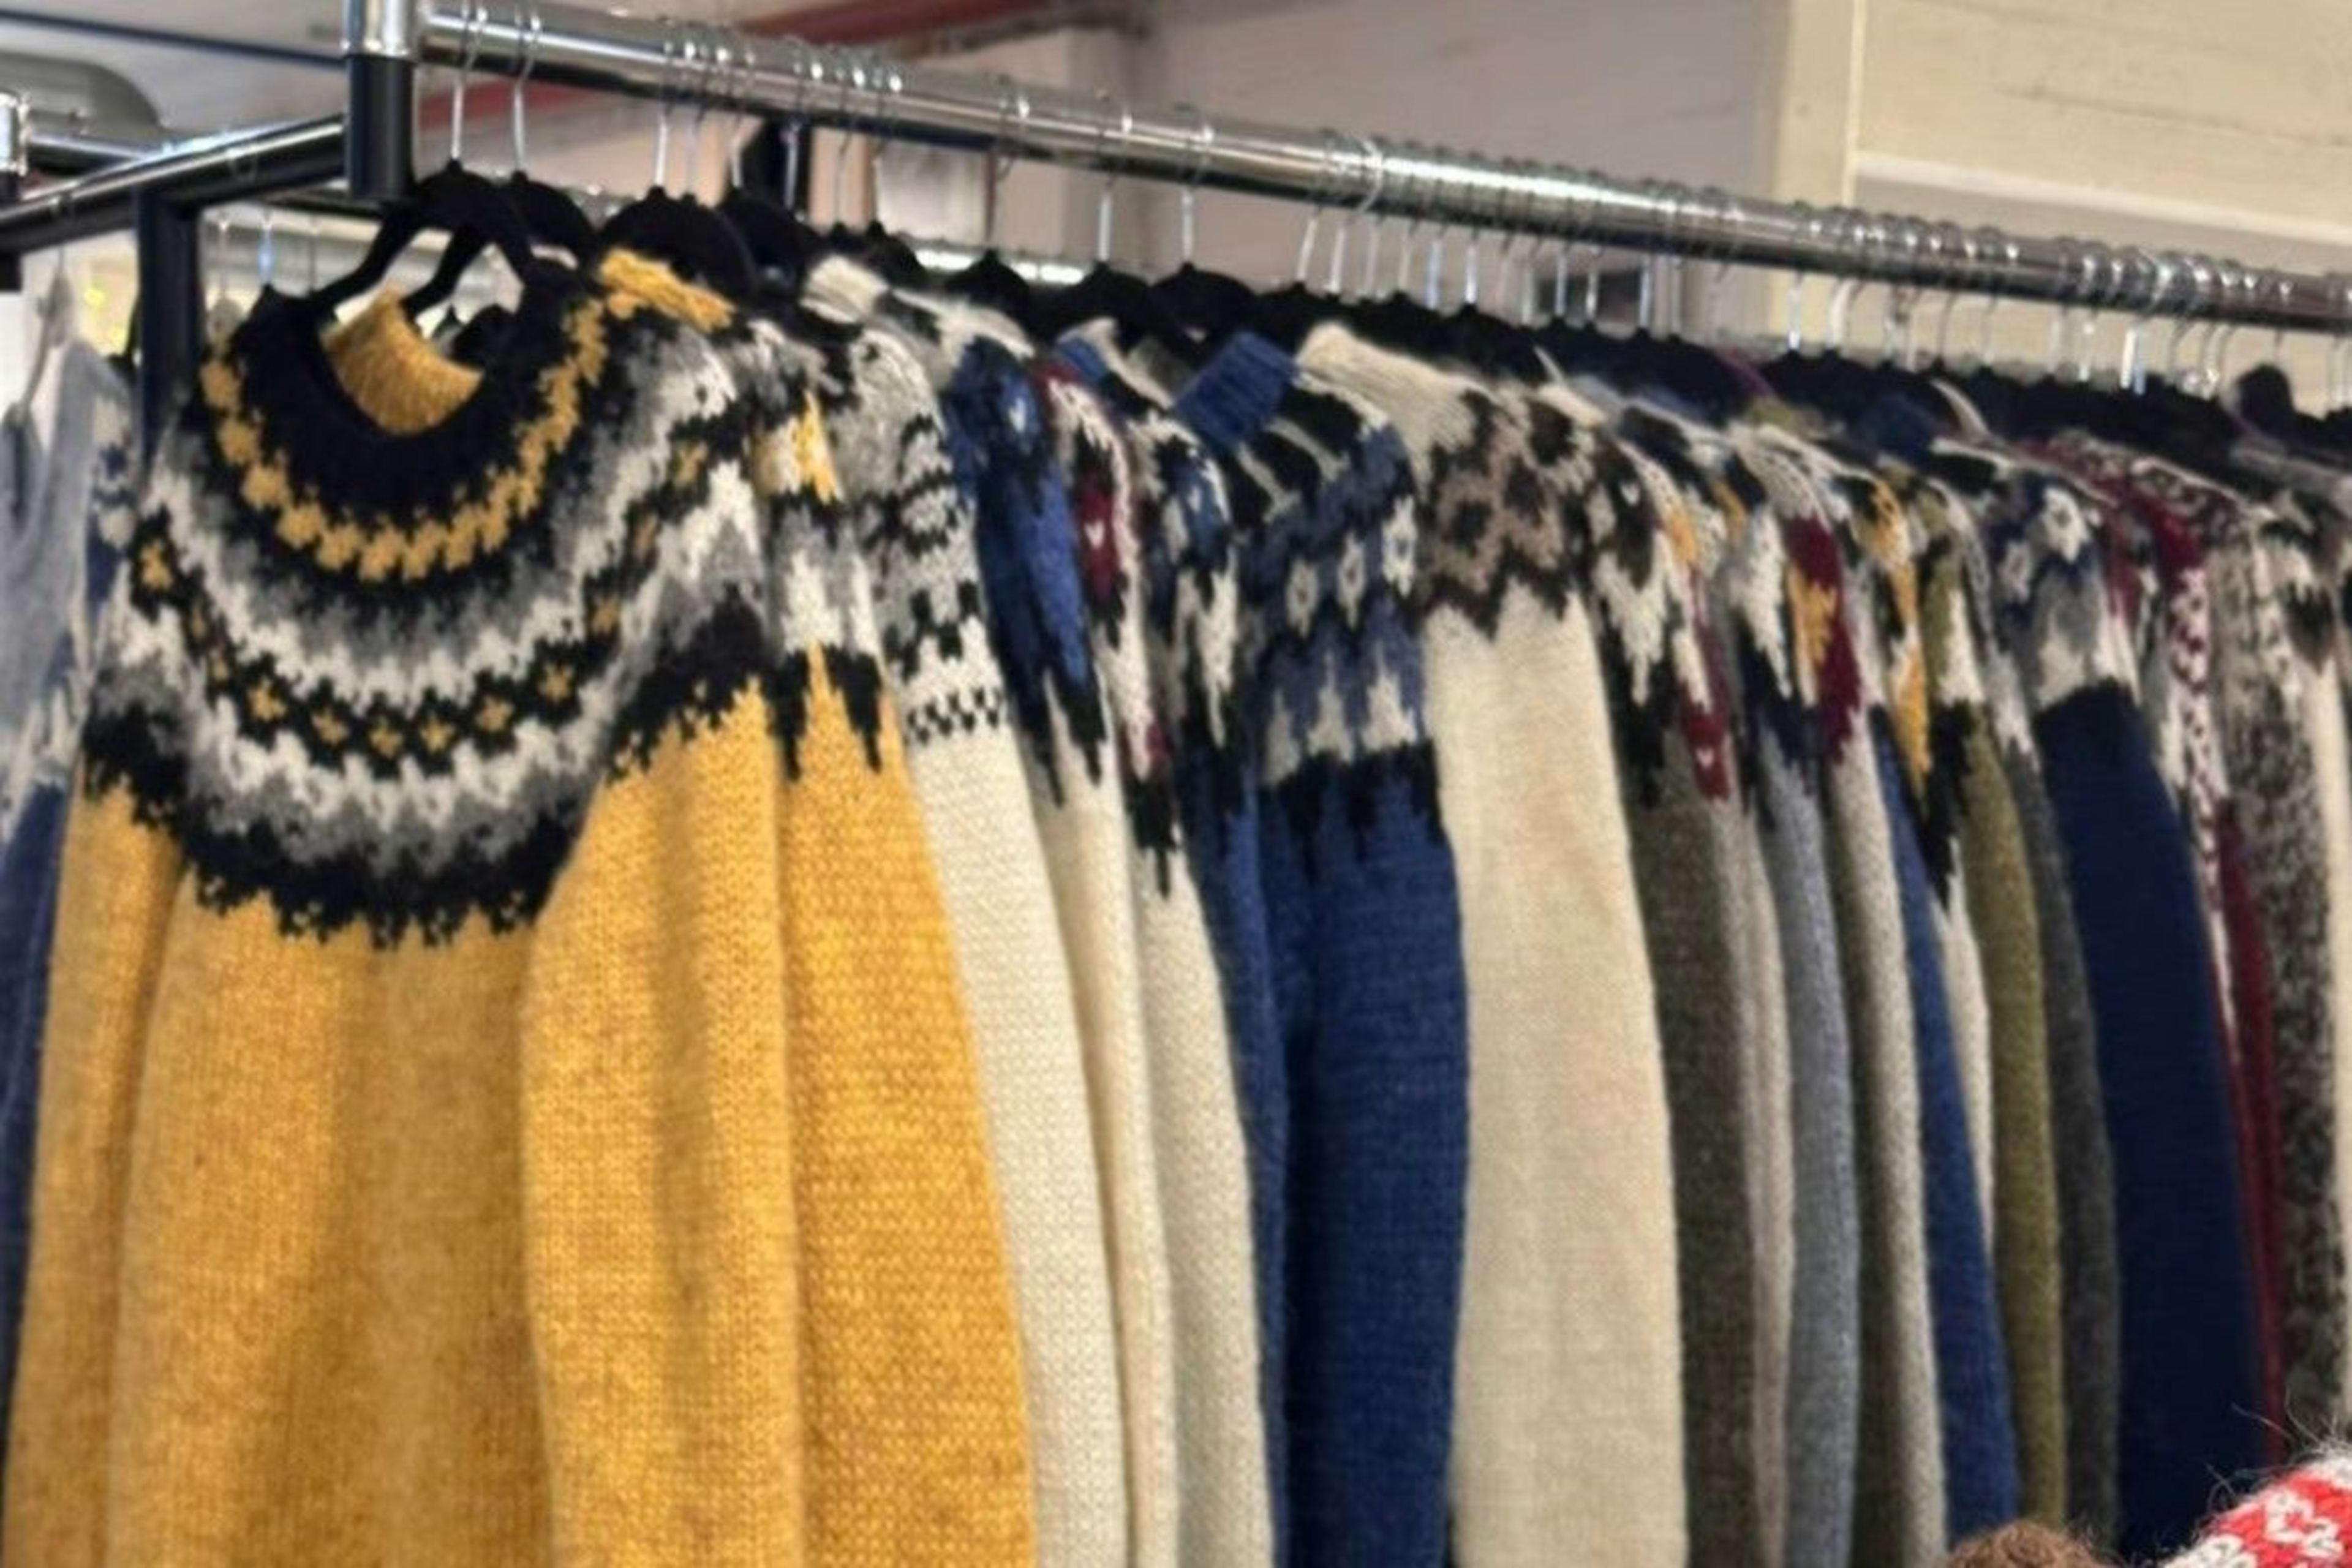 icelandic sweaters for selecting 